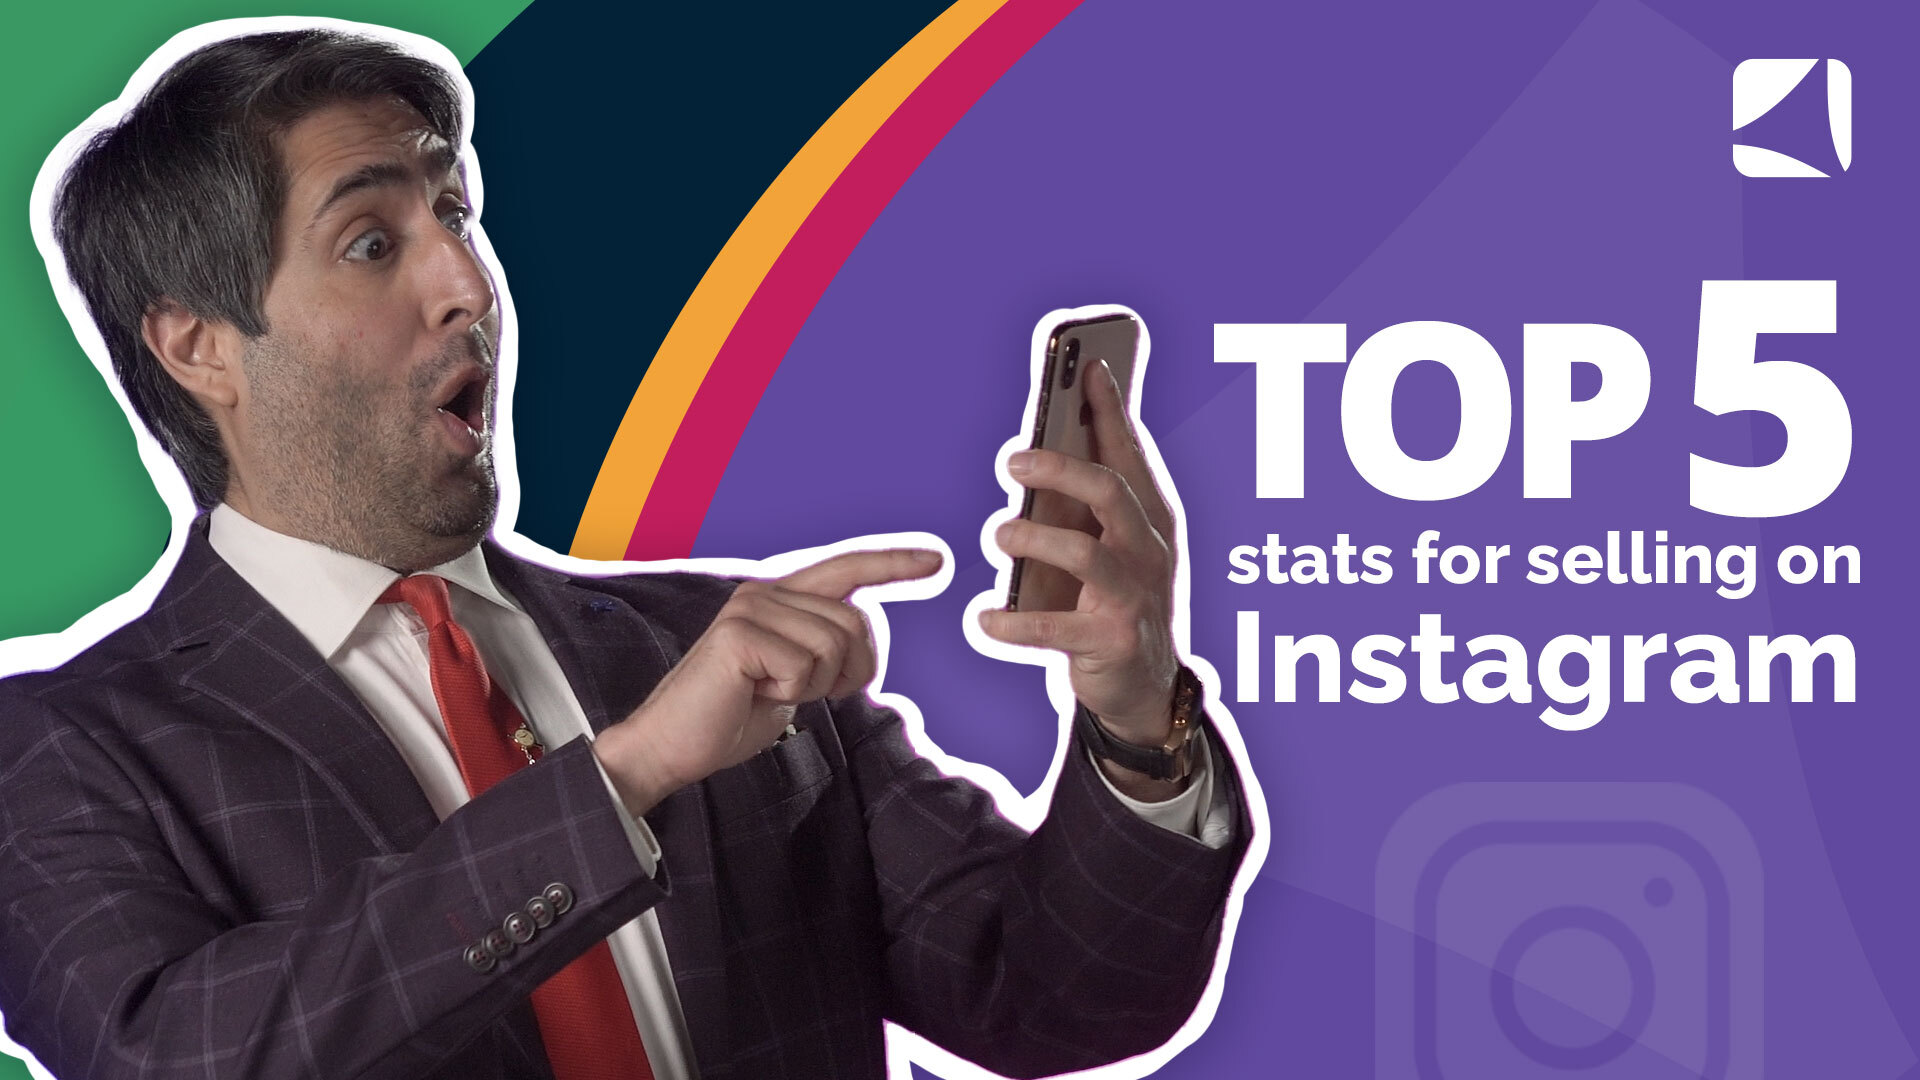 5-stats-for-selling-on-Instagram (1)